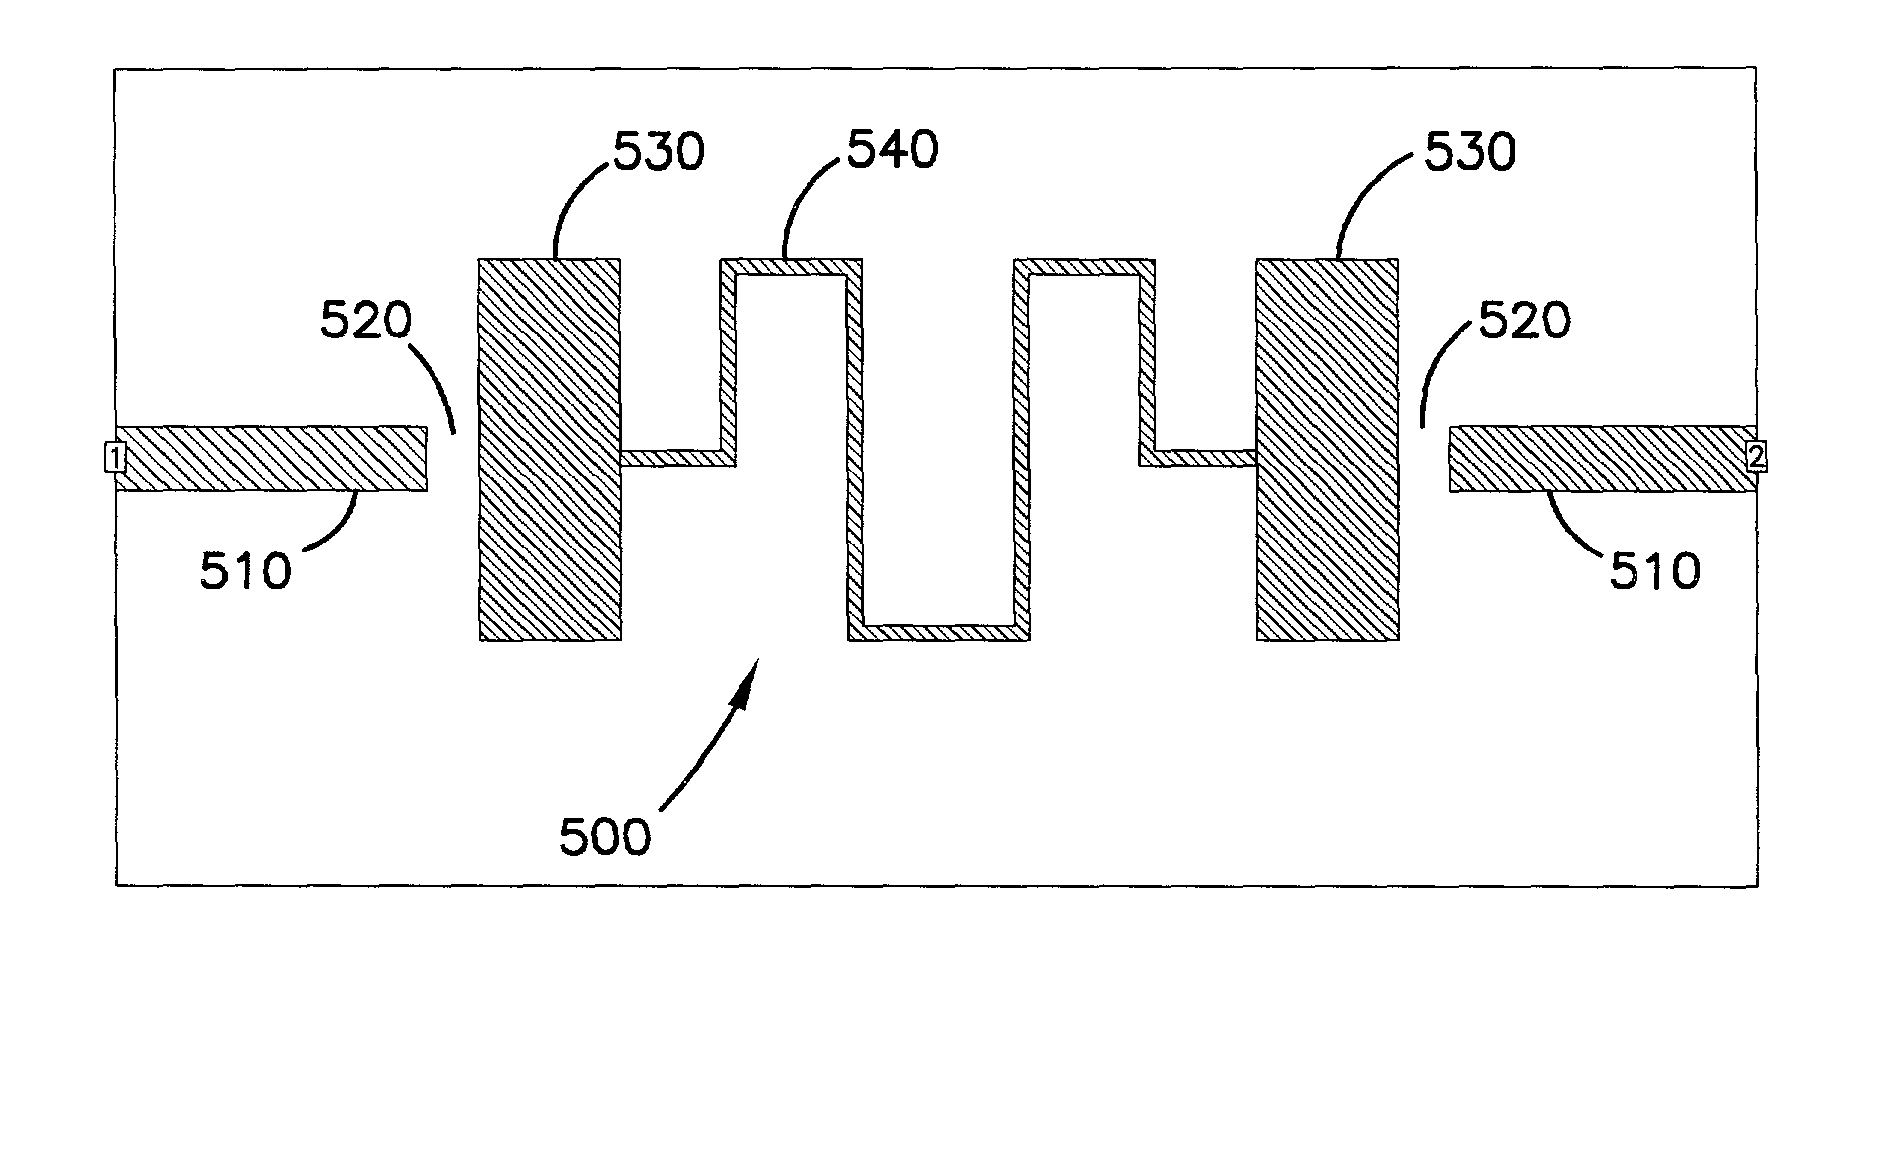 Device approximating a shunt capacitor for strip-line-type circuits